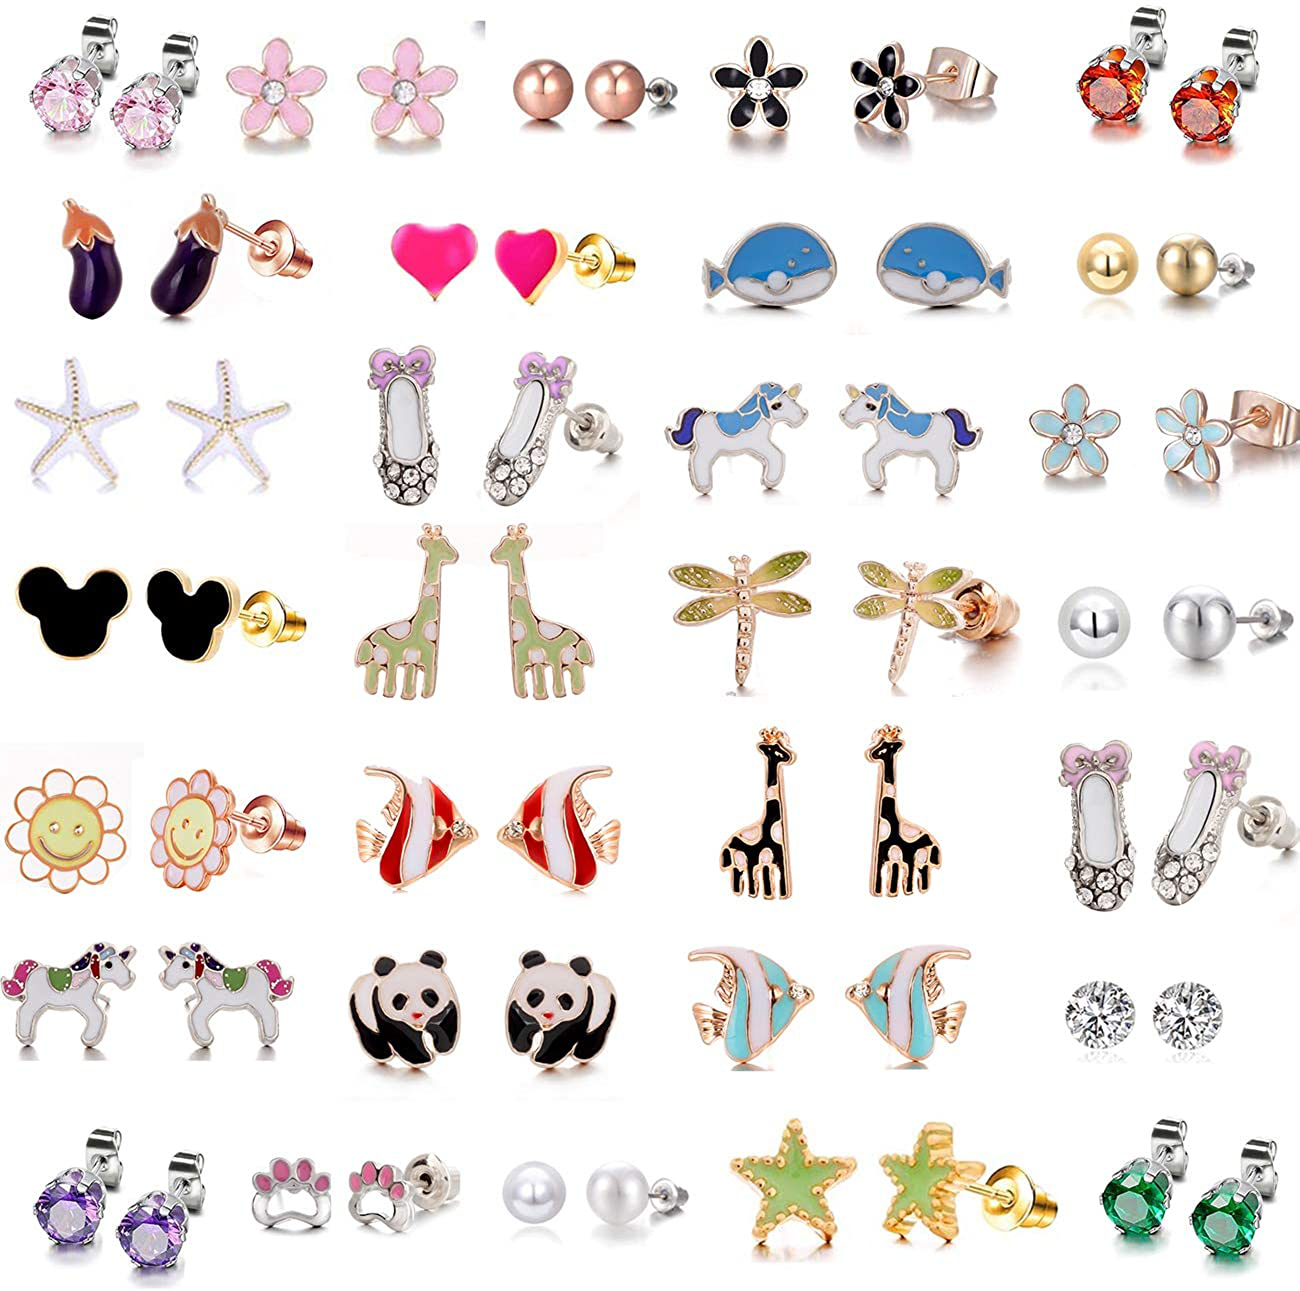 30/33 Pairs Hypoallergenic Sutd Earrings for Girls Sensitive Ears with Stainless Steel Post - Assorted Sytle and Vivid Color Earrings Set